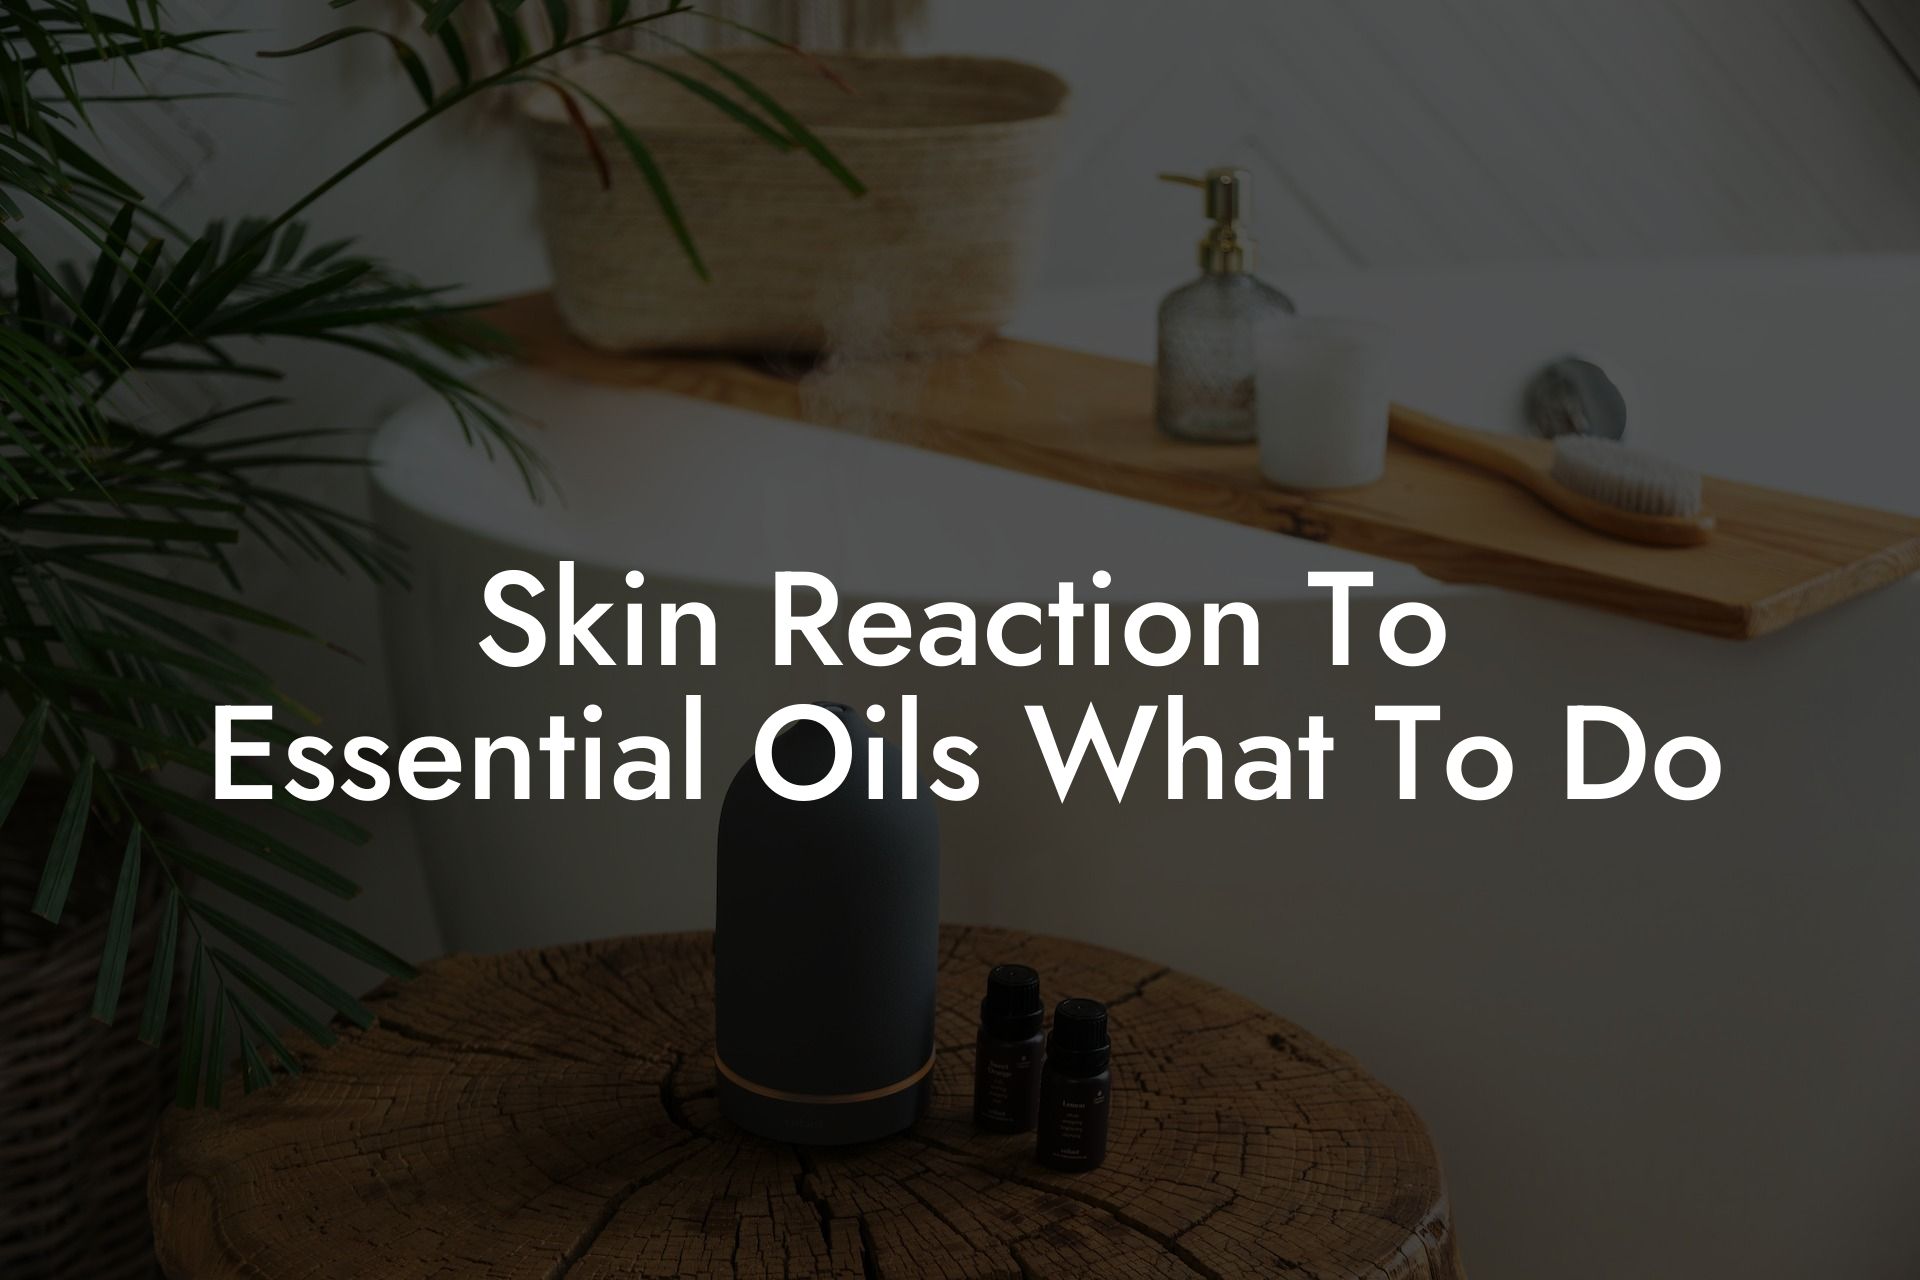 Skin Reaction To Essential Oils What To Do